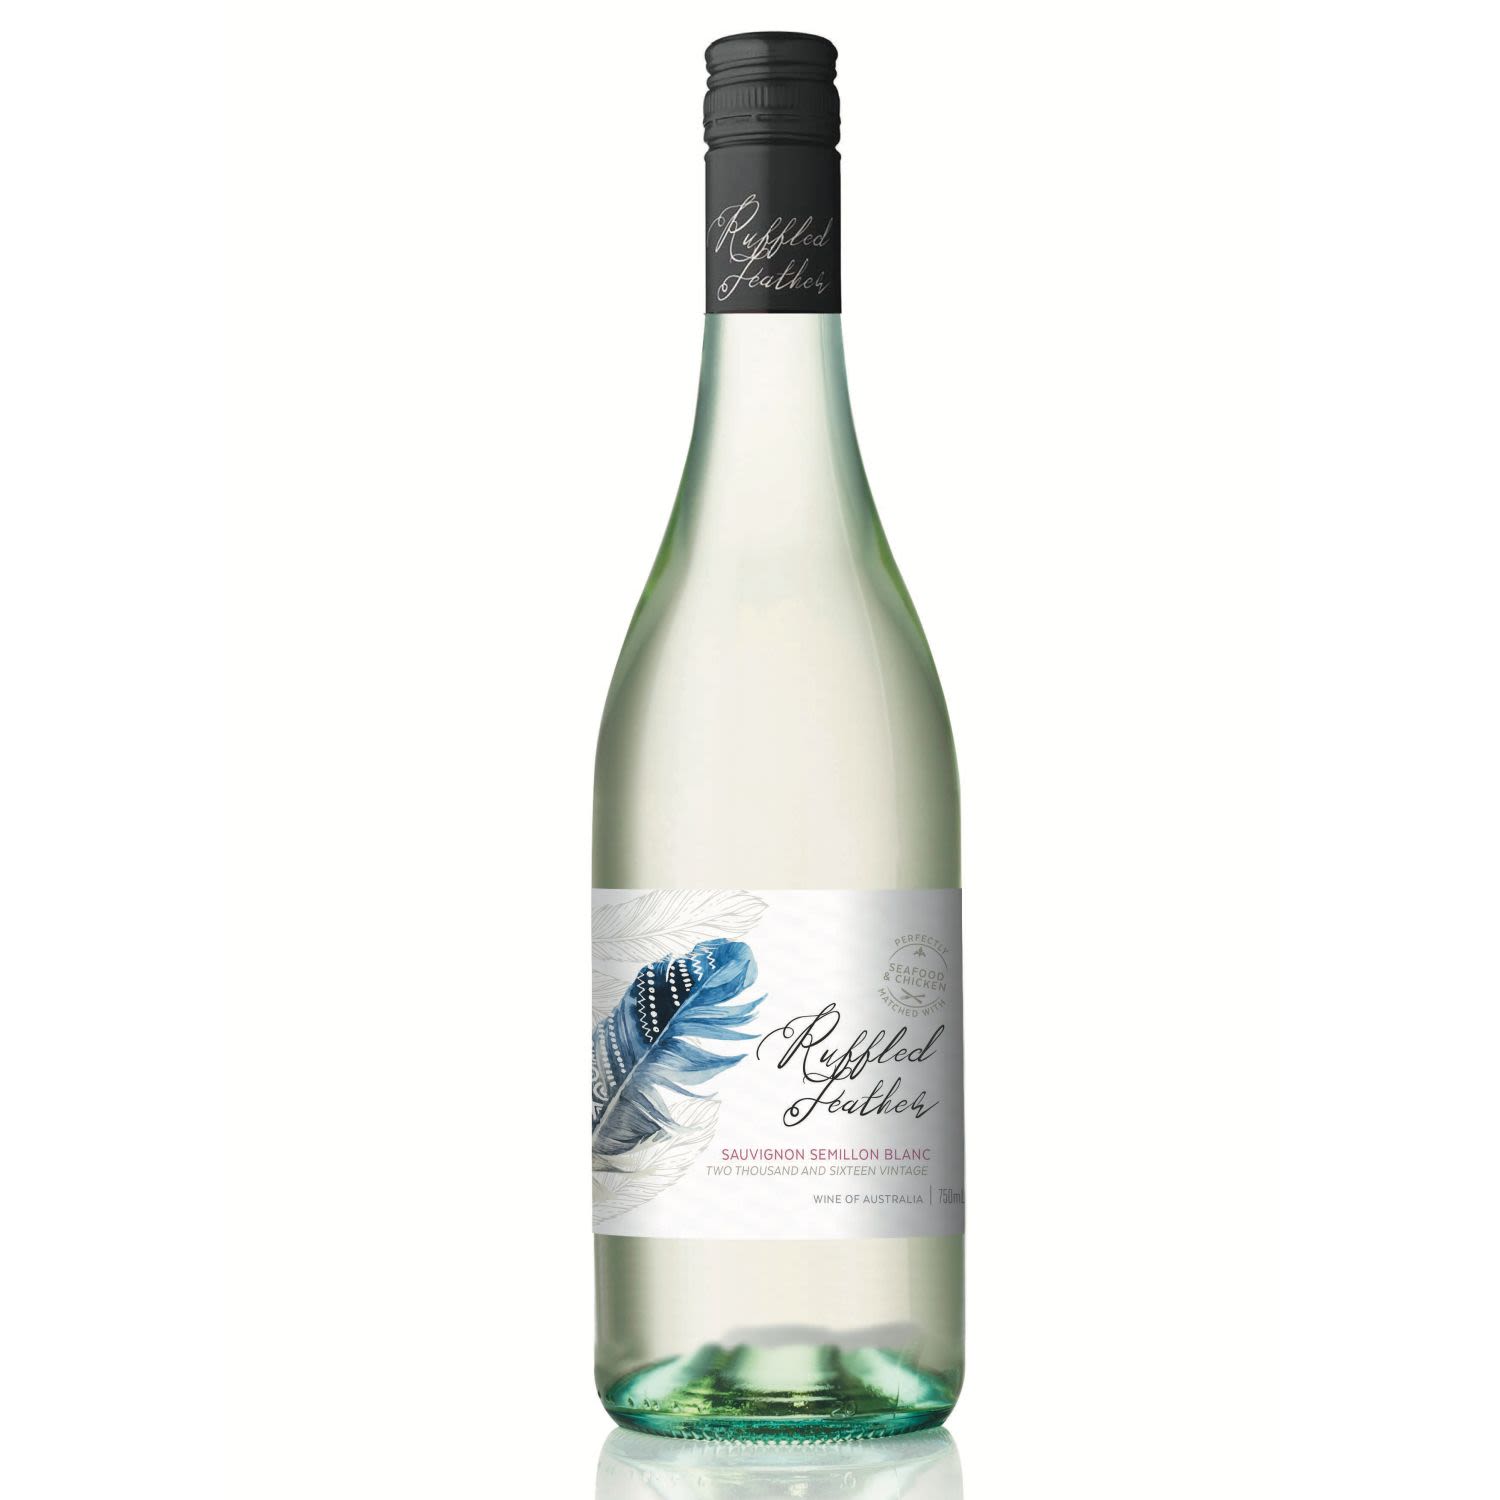 Semillon Sauvignon Blanc is a wine that originated in the Bordeaux region of France, however, Australian has adopted and continued to perfect the varietal. Ruffled Feather Semillon Sauvignon Blanc is a versatile wine that goes well with scallops, chicken satay and fish pie.<br /> <br />Alcohol Volume: 11.50%<br /><br />Pack Format: 12 Pack<br /><br />Standard Drinks: 6.8</br /><br />Pack Type: Bottle<br /><br />Country of Origin: Australia<br /><br />Region: South Eastern Australia<br /><br />Vintage: Vintages Vary<br />